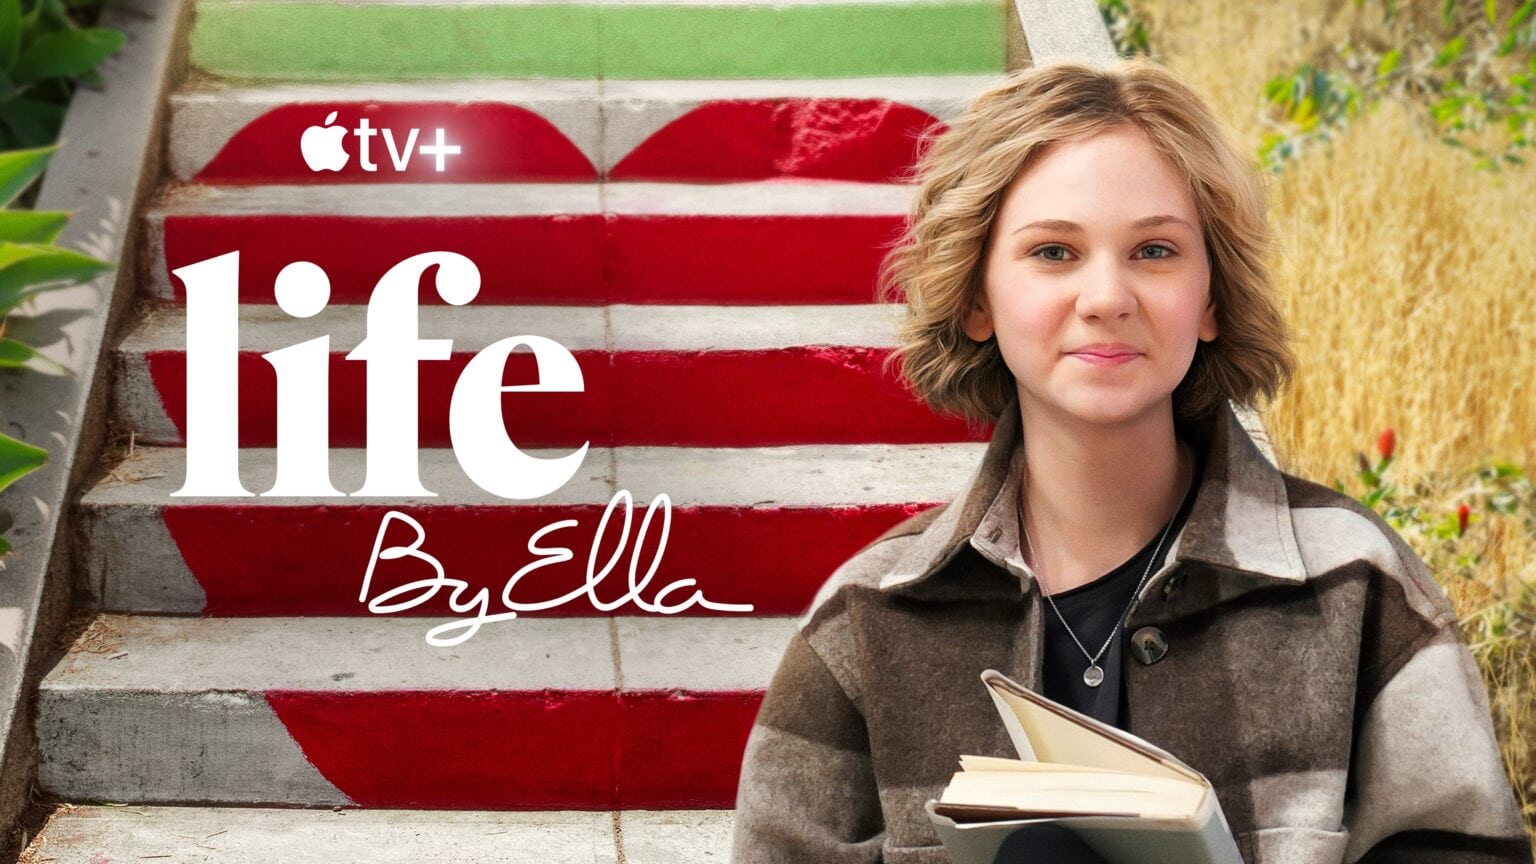 'Life By Ella' trailer shows a very upbeat teen in new Apple TV+ series